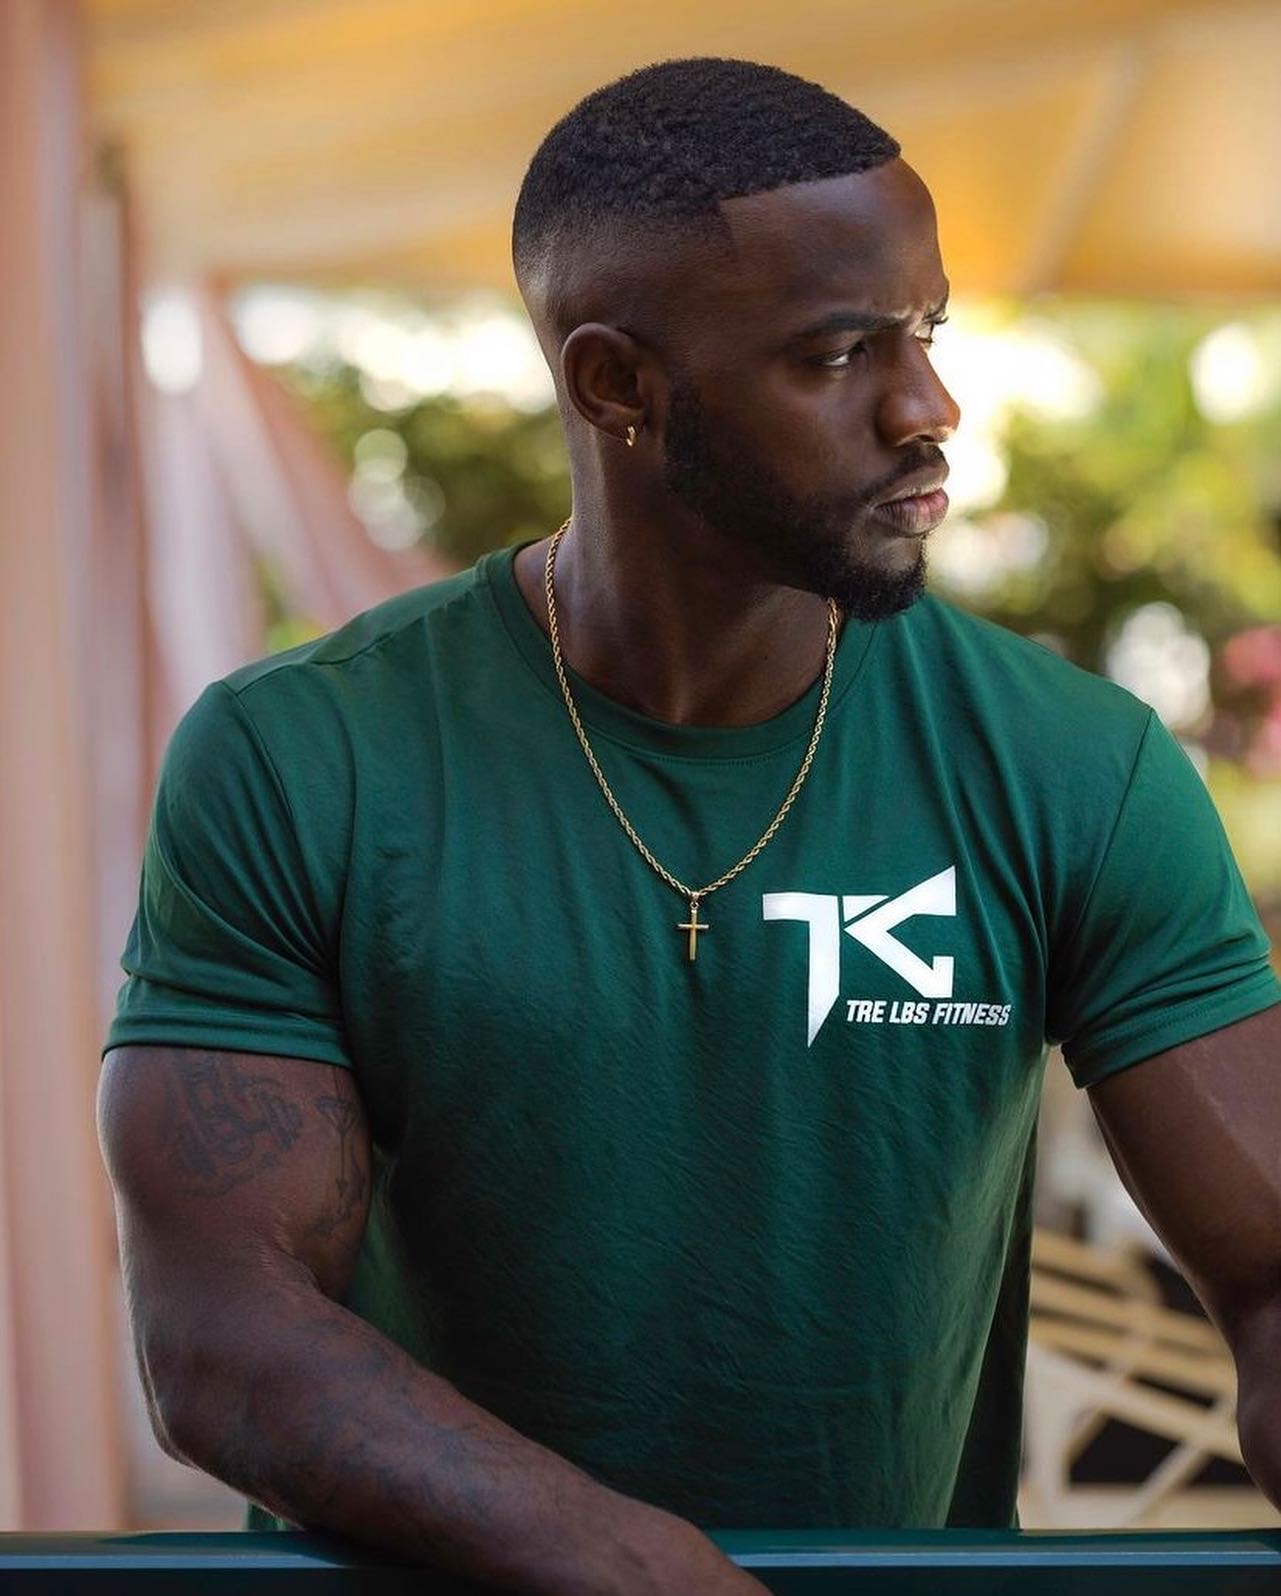 Tre LBS Fitness founded by Tre Catchings: Getting fit made even greater